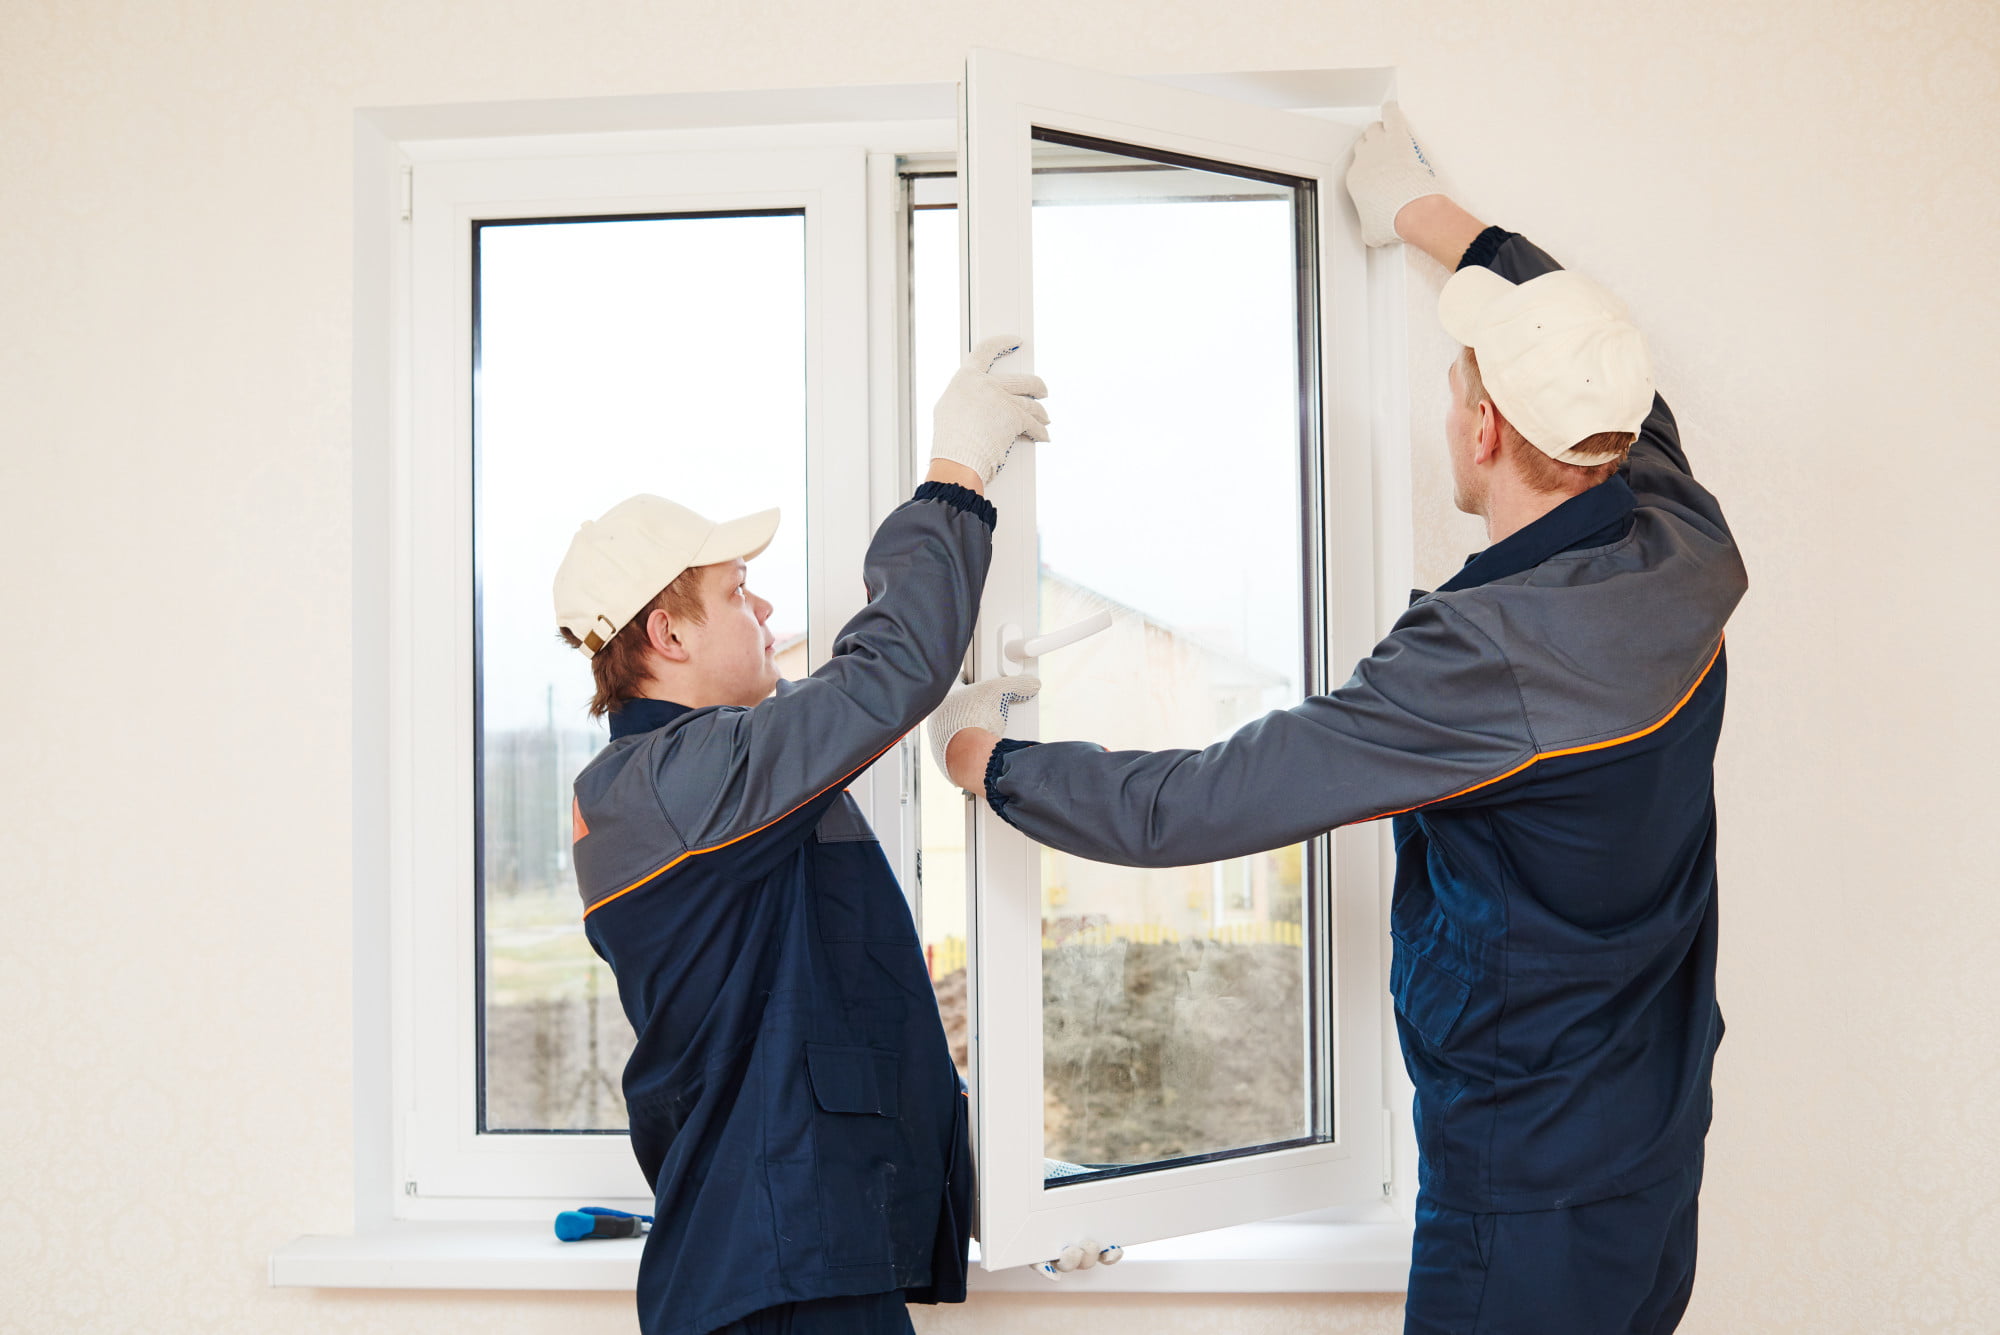 Best window installer near me: Do you want to know how to choose the right window installation service? Read on to learn how to make the right choice.